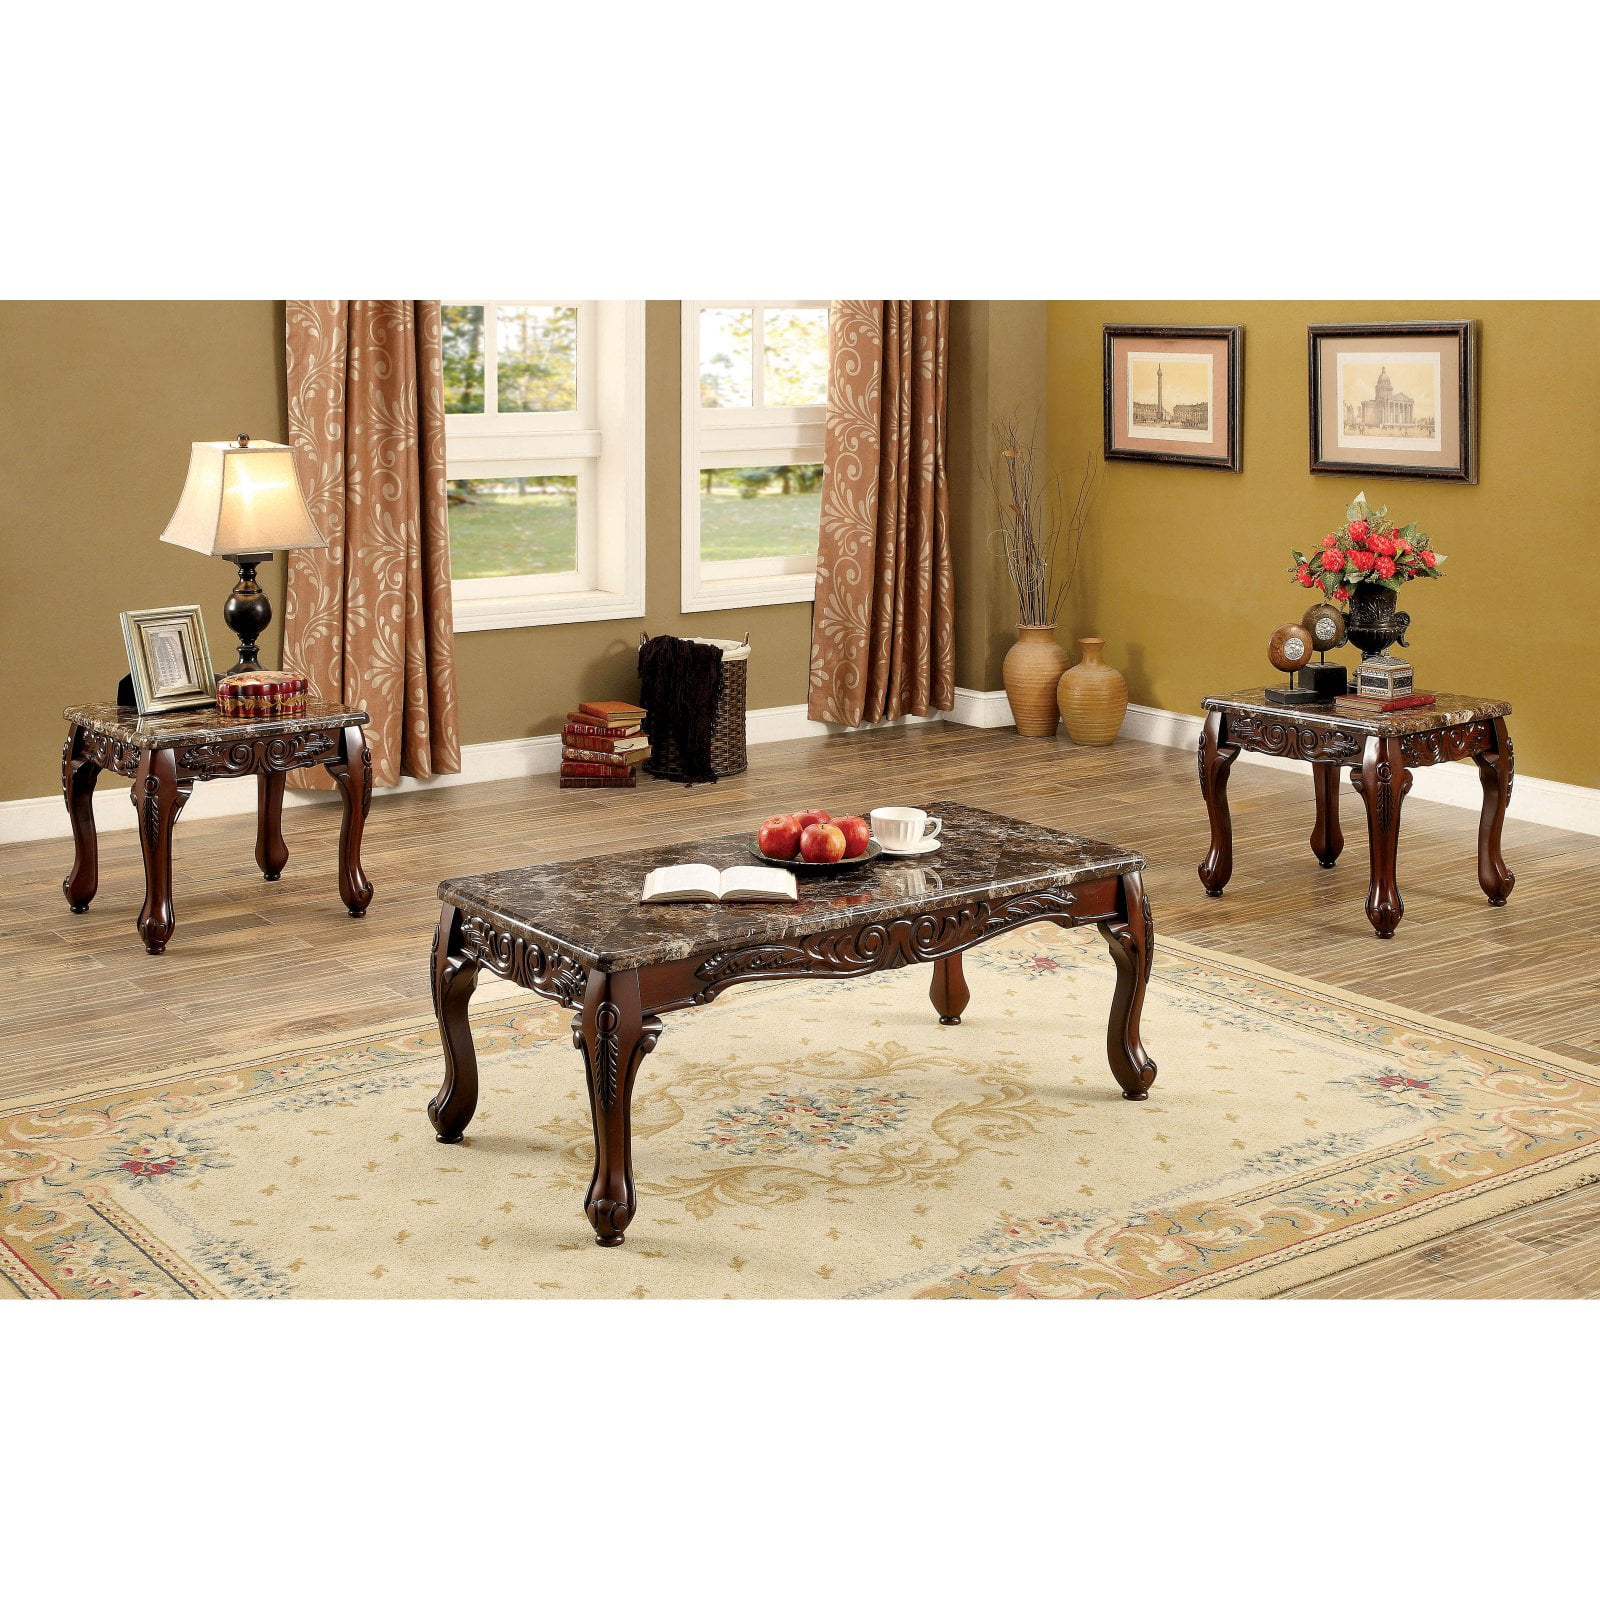 Excelent 3 piece faux marble coffee table set Furniture Of America Tollero Traditional Style 3 Piece Faux Marble Coffee Table Set Walmart Com